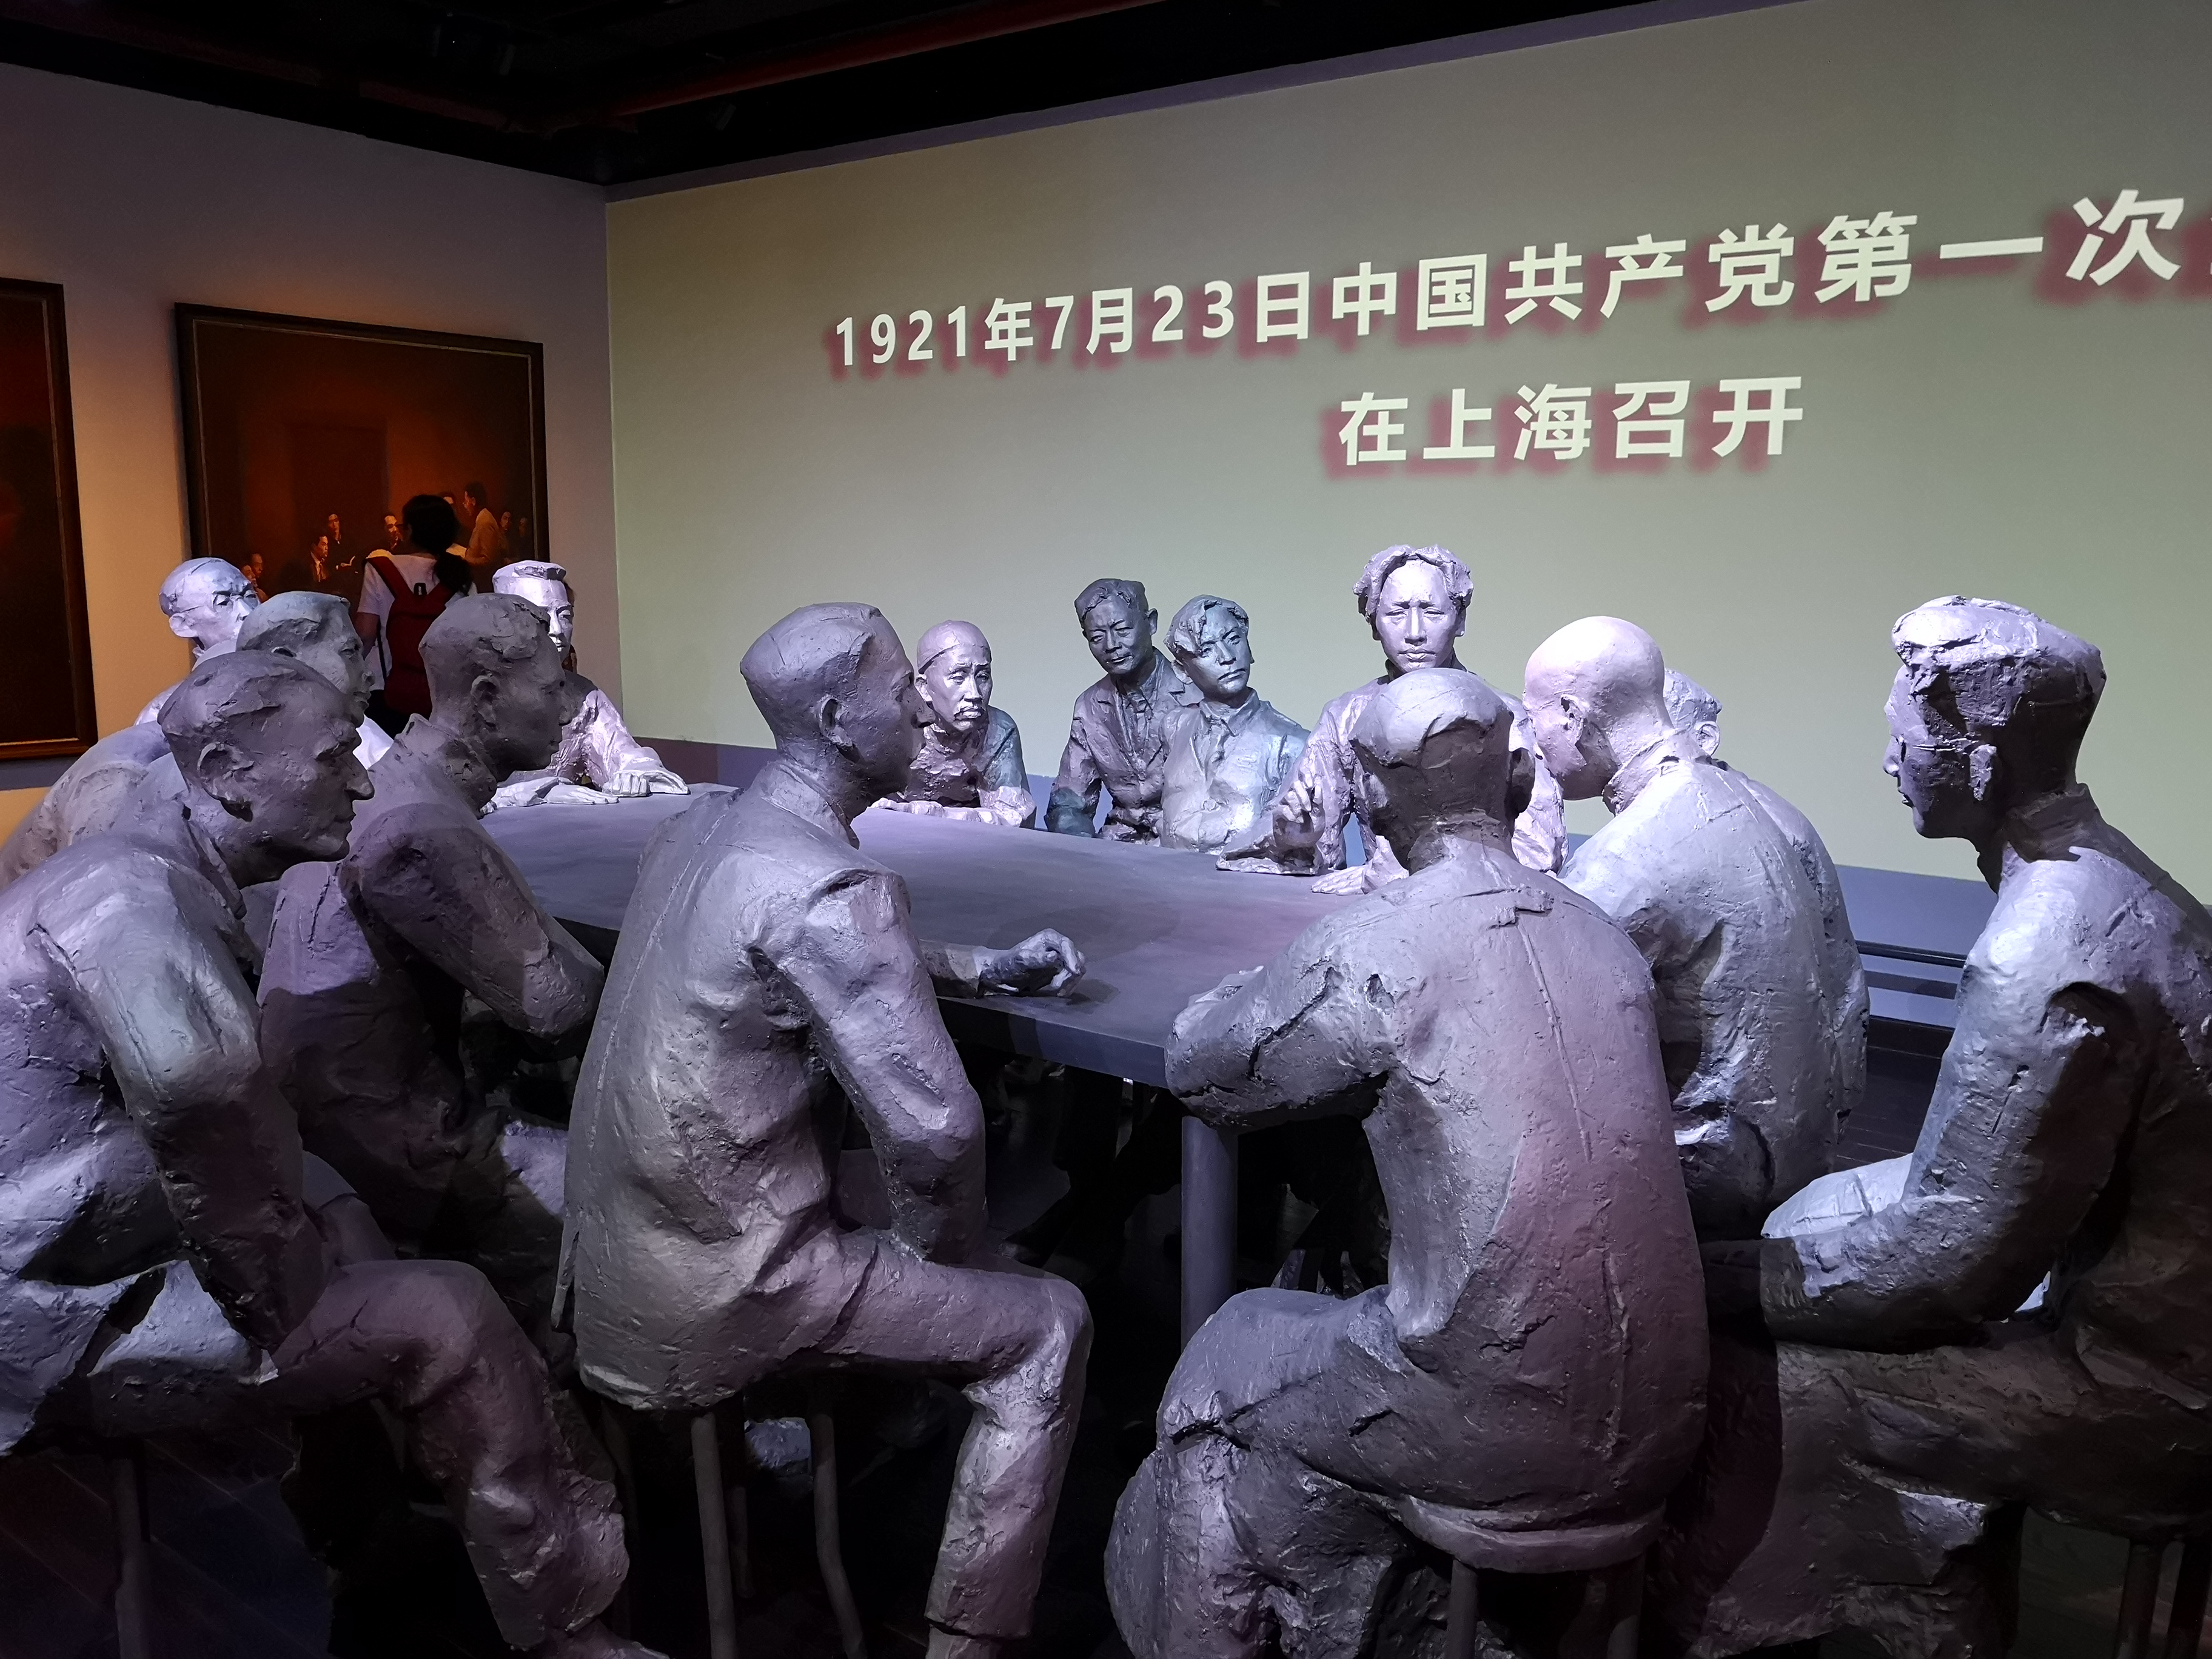 File:Sculpture of the 1st CPC National Congress.jpg